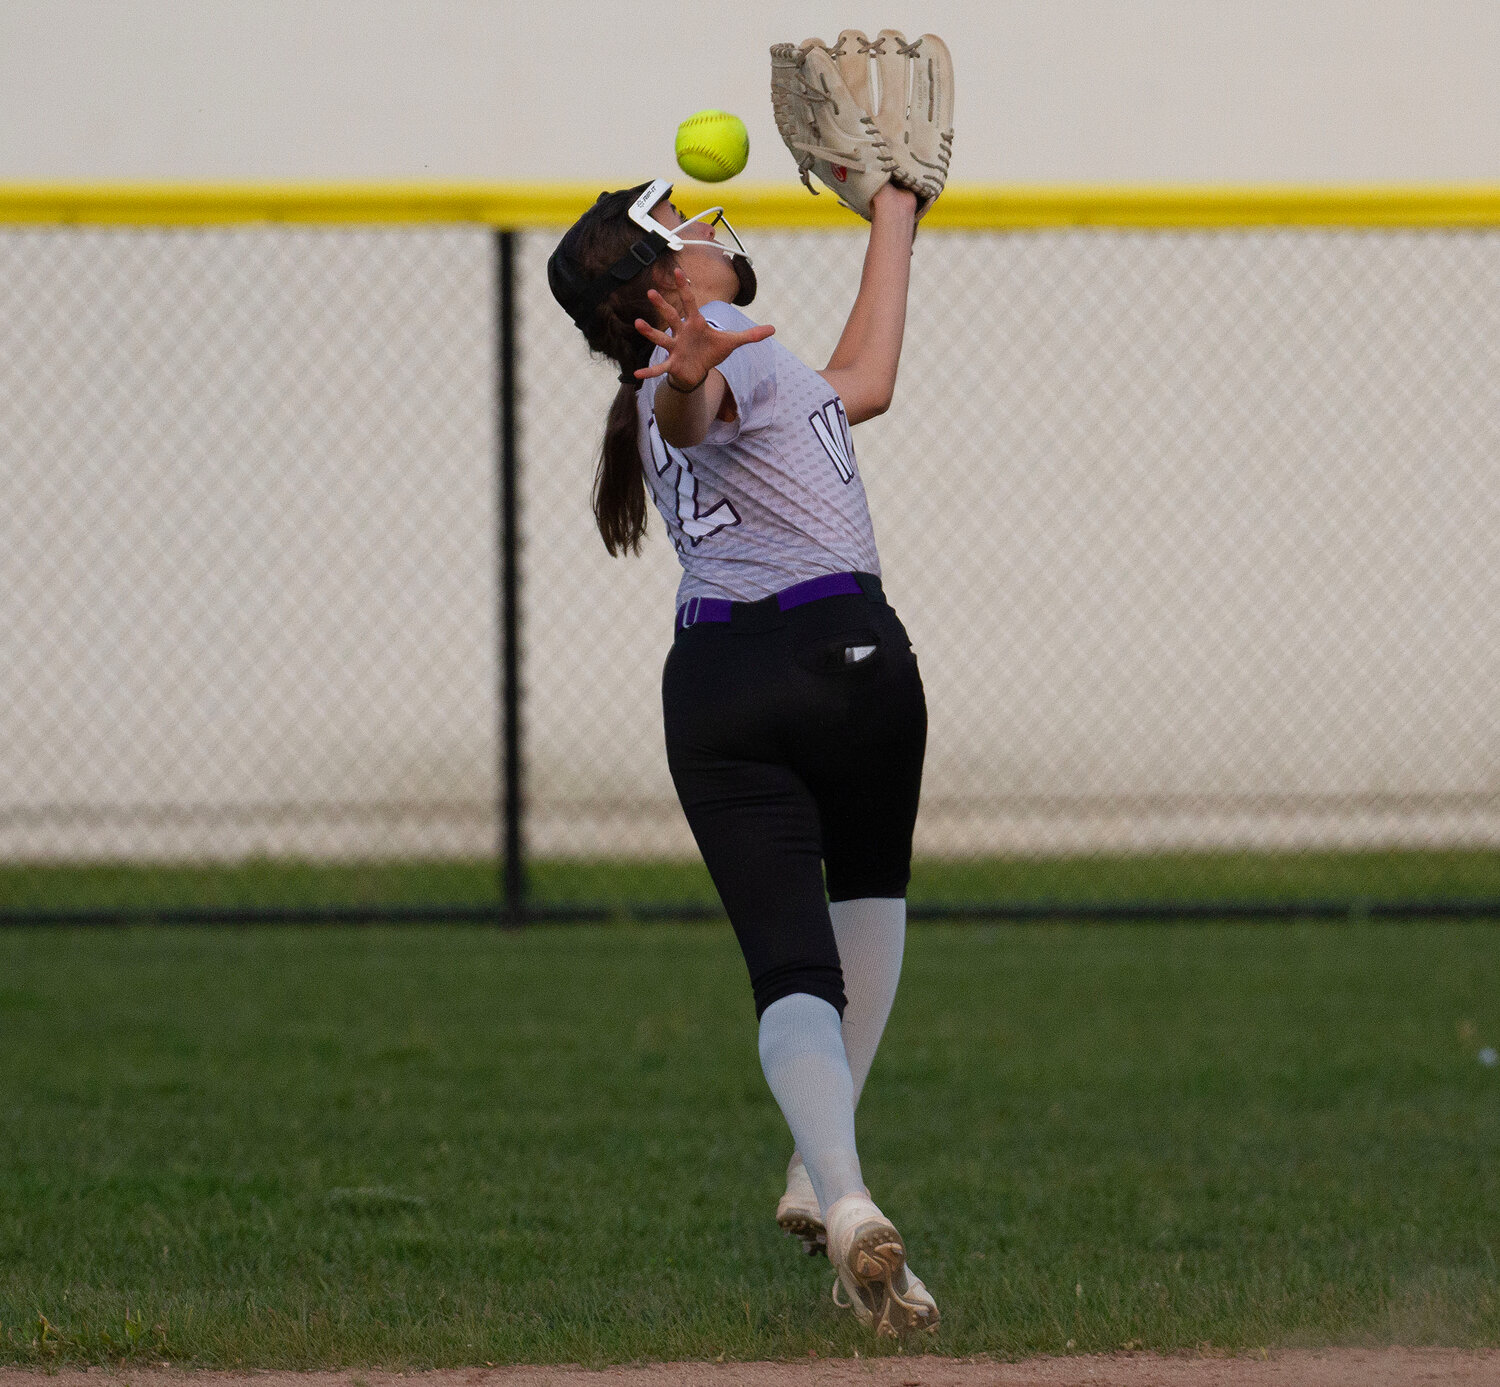 Elsa White attempts to catch a ball hit to the right centerfield gap.